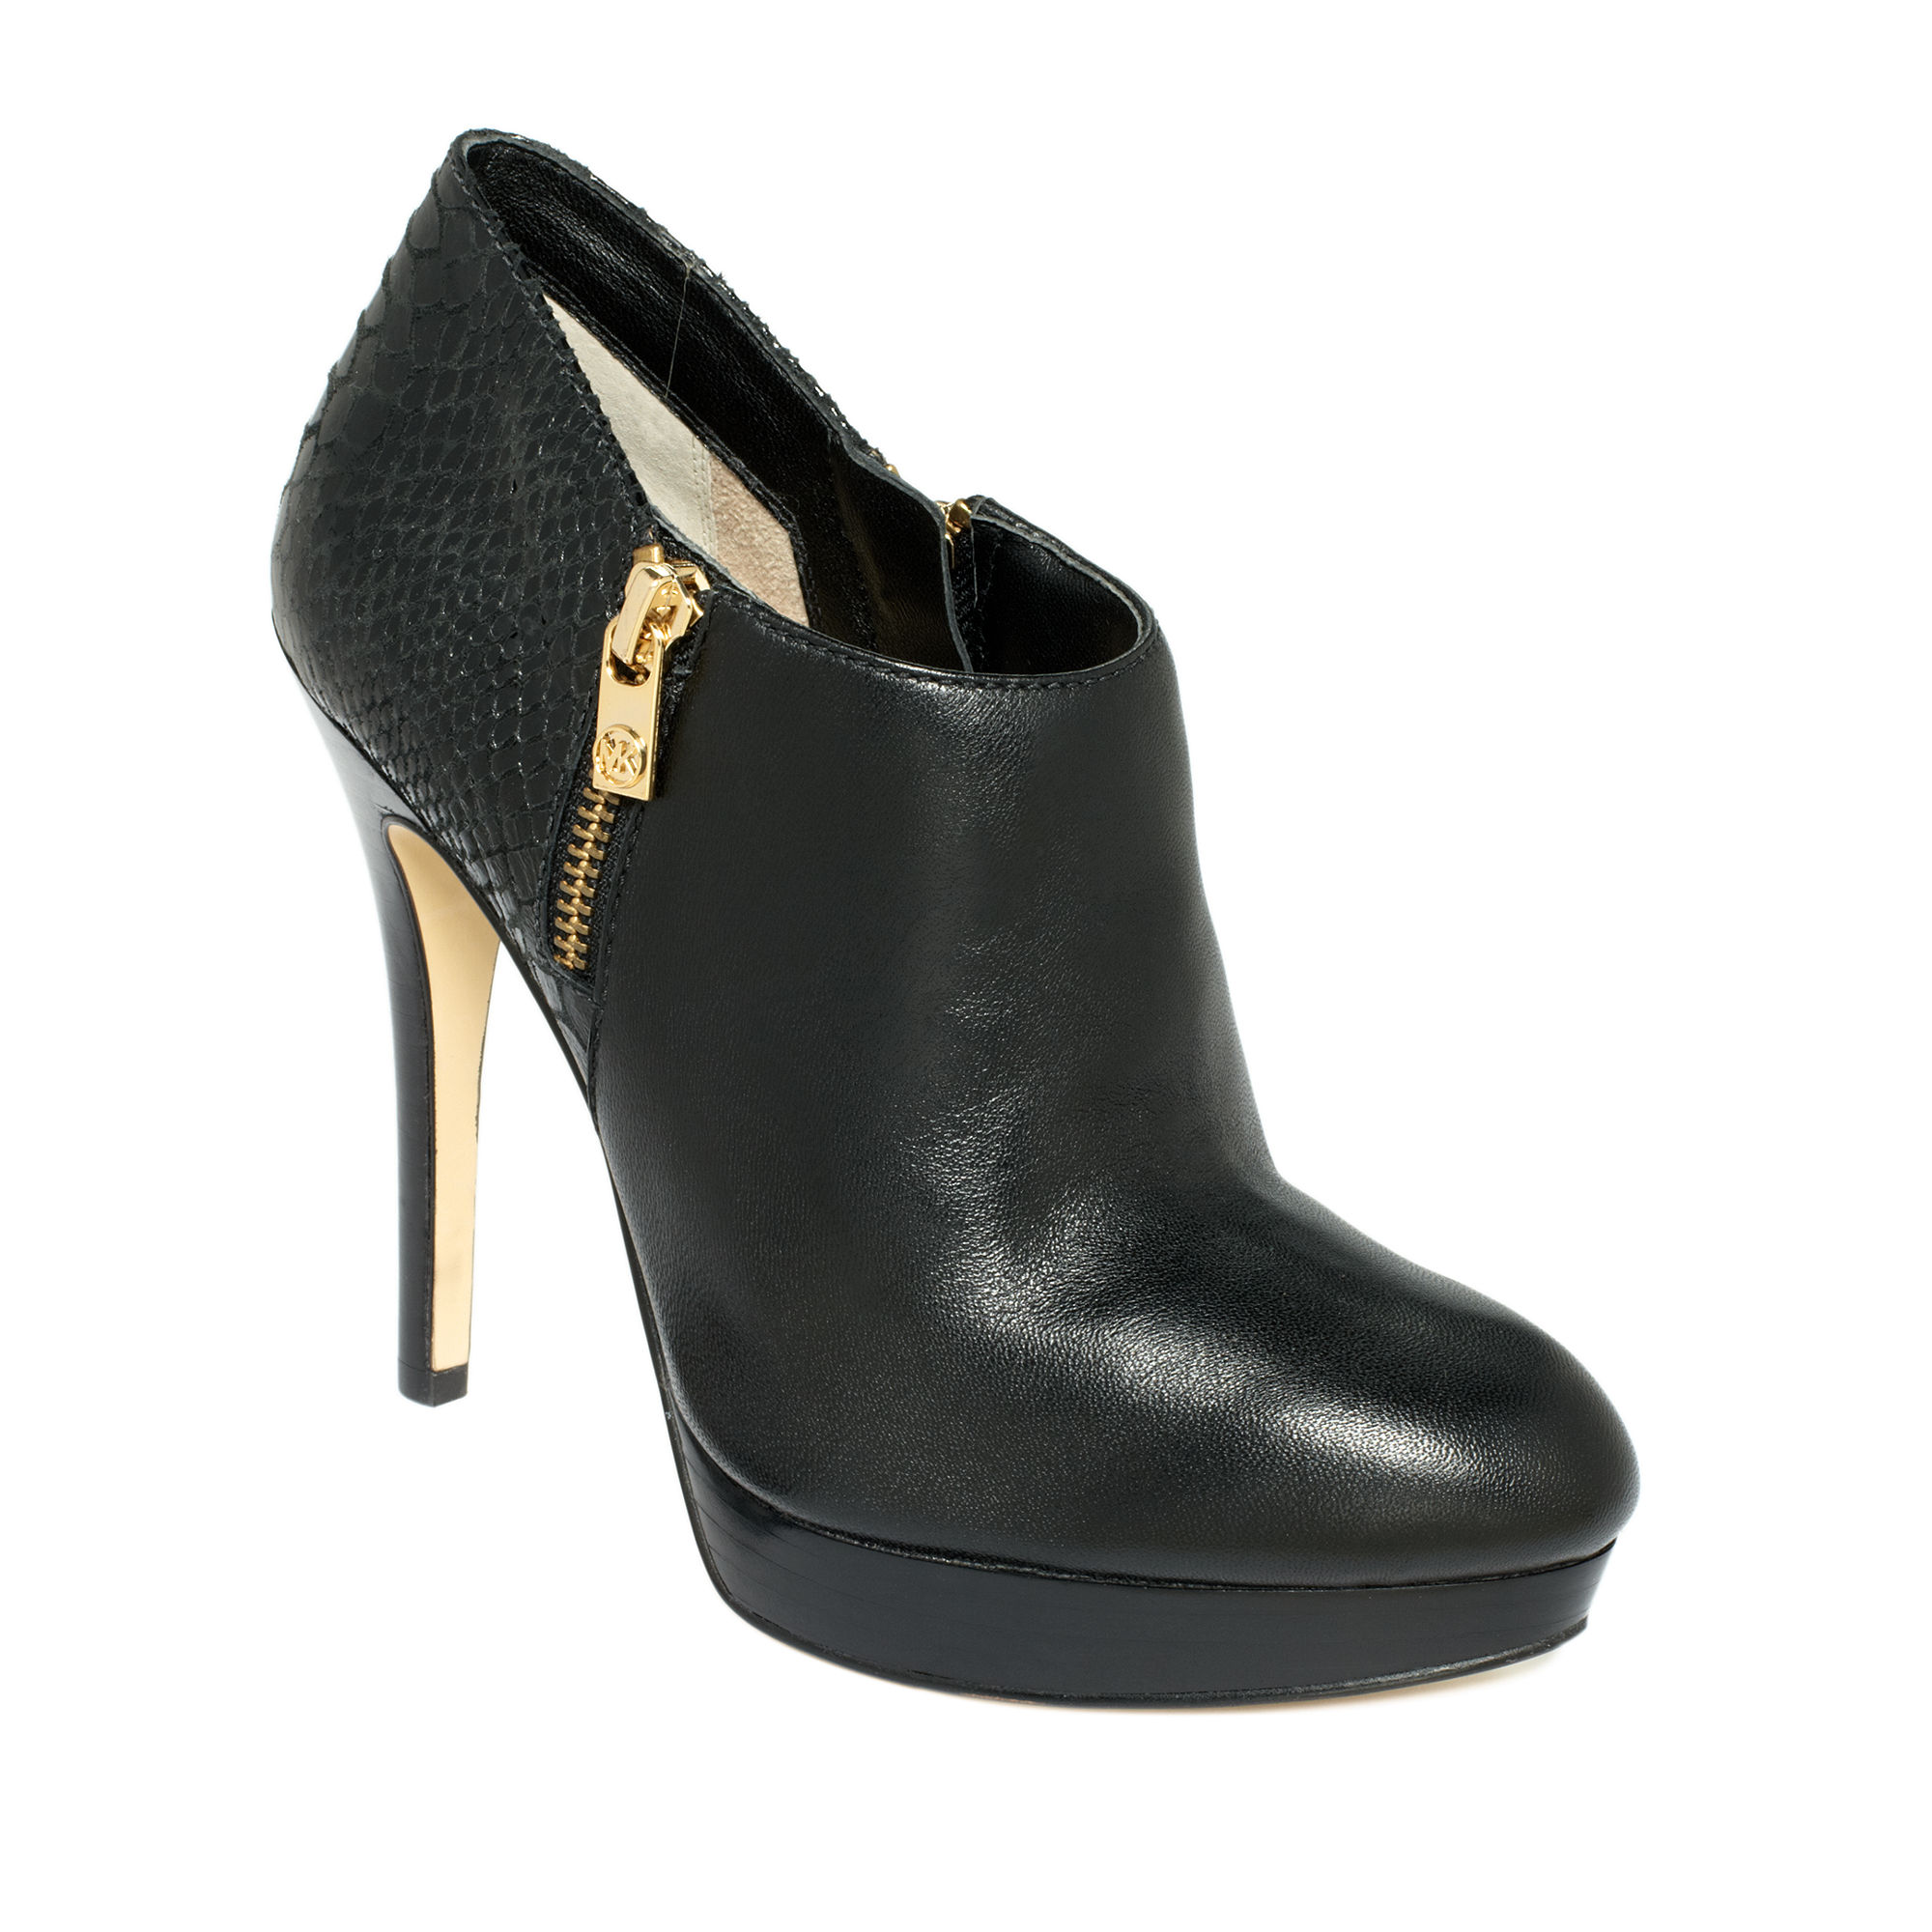 Michael Kors York Ankle Boots in Grey Suede (Black) - Lyst